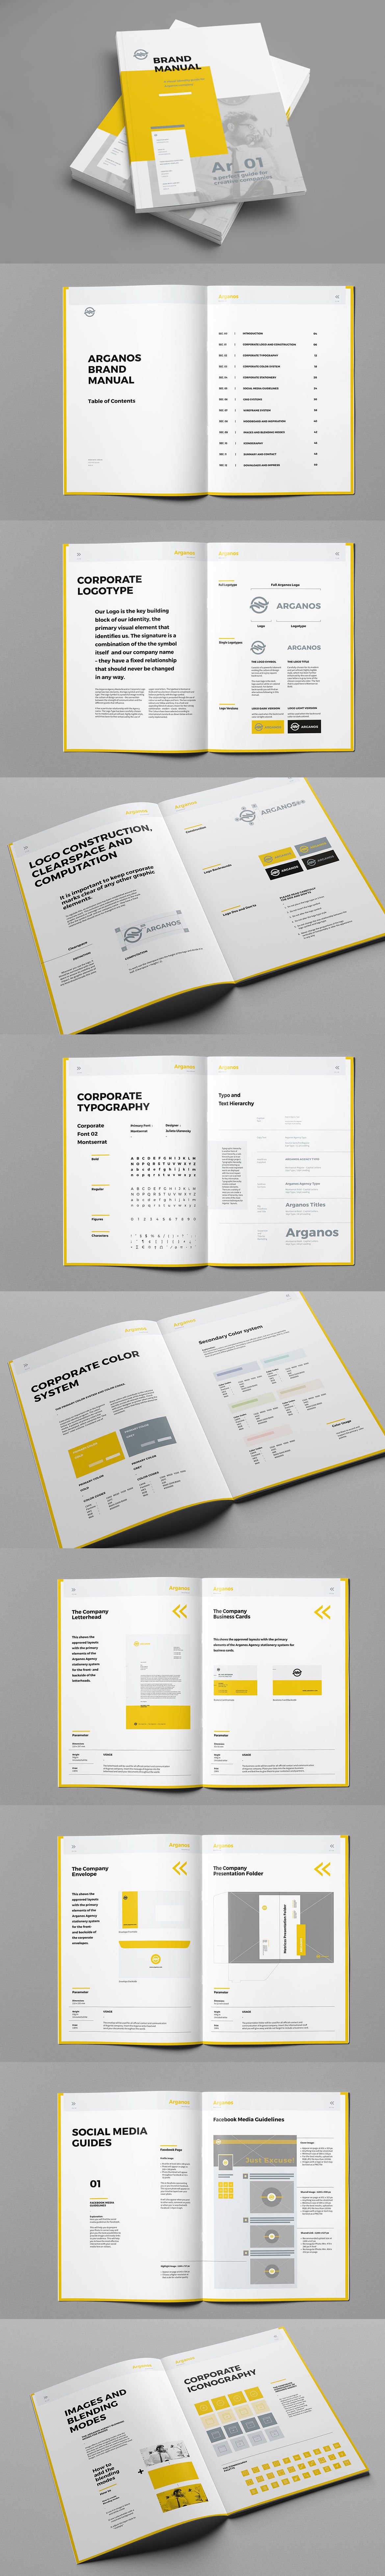 brand style guide template illustrator